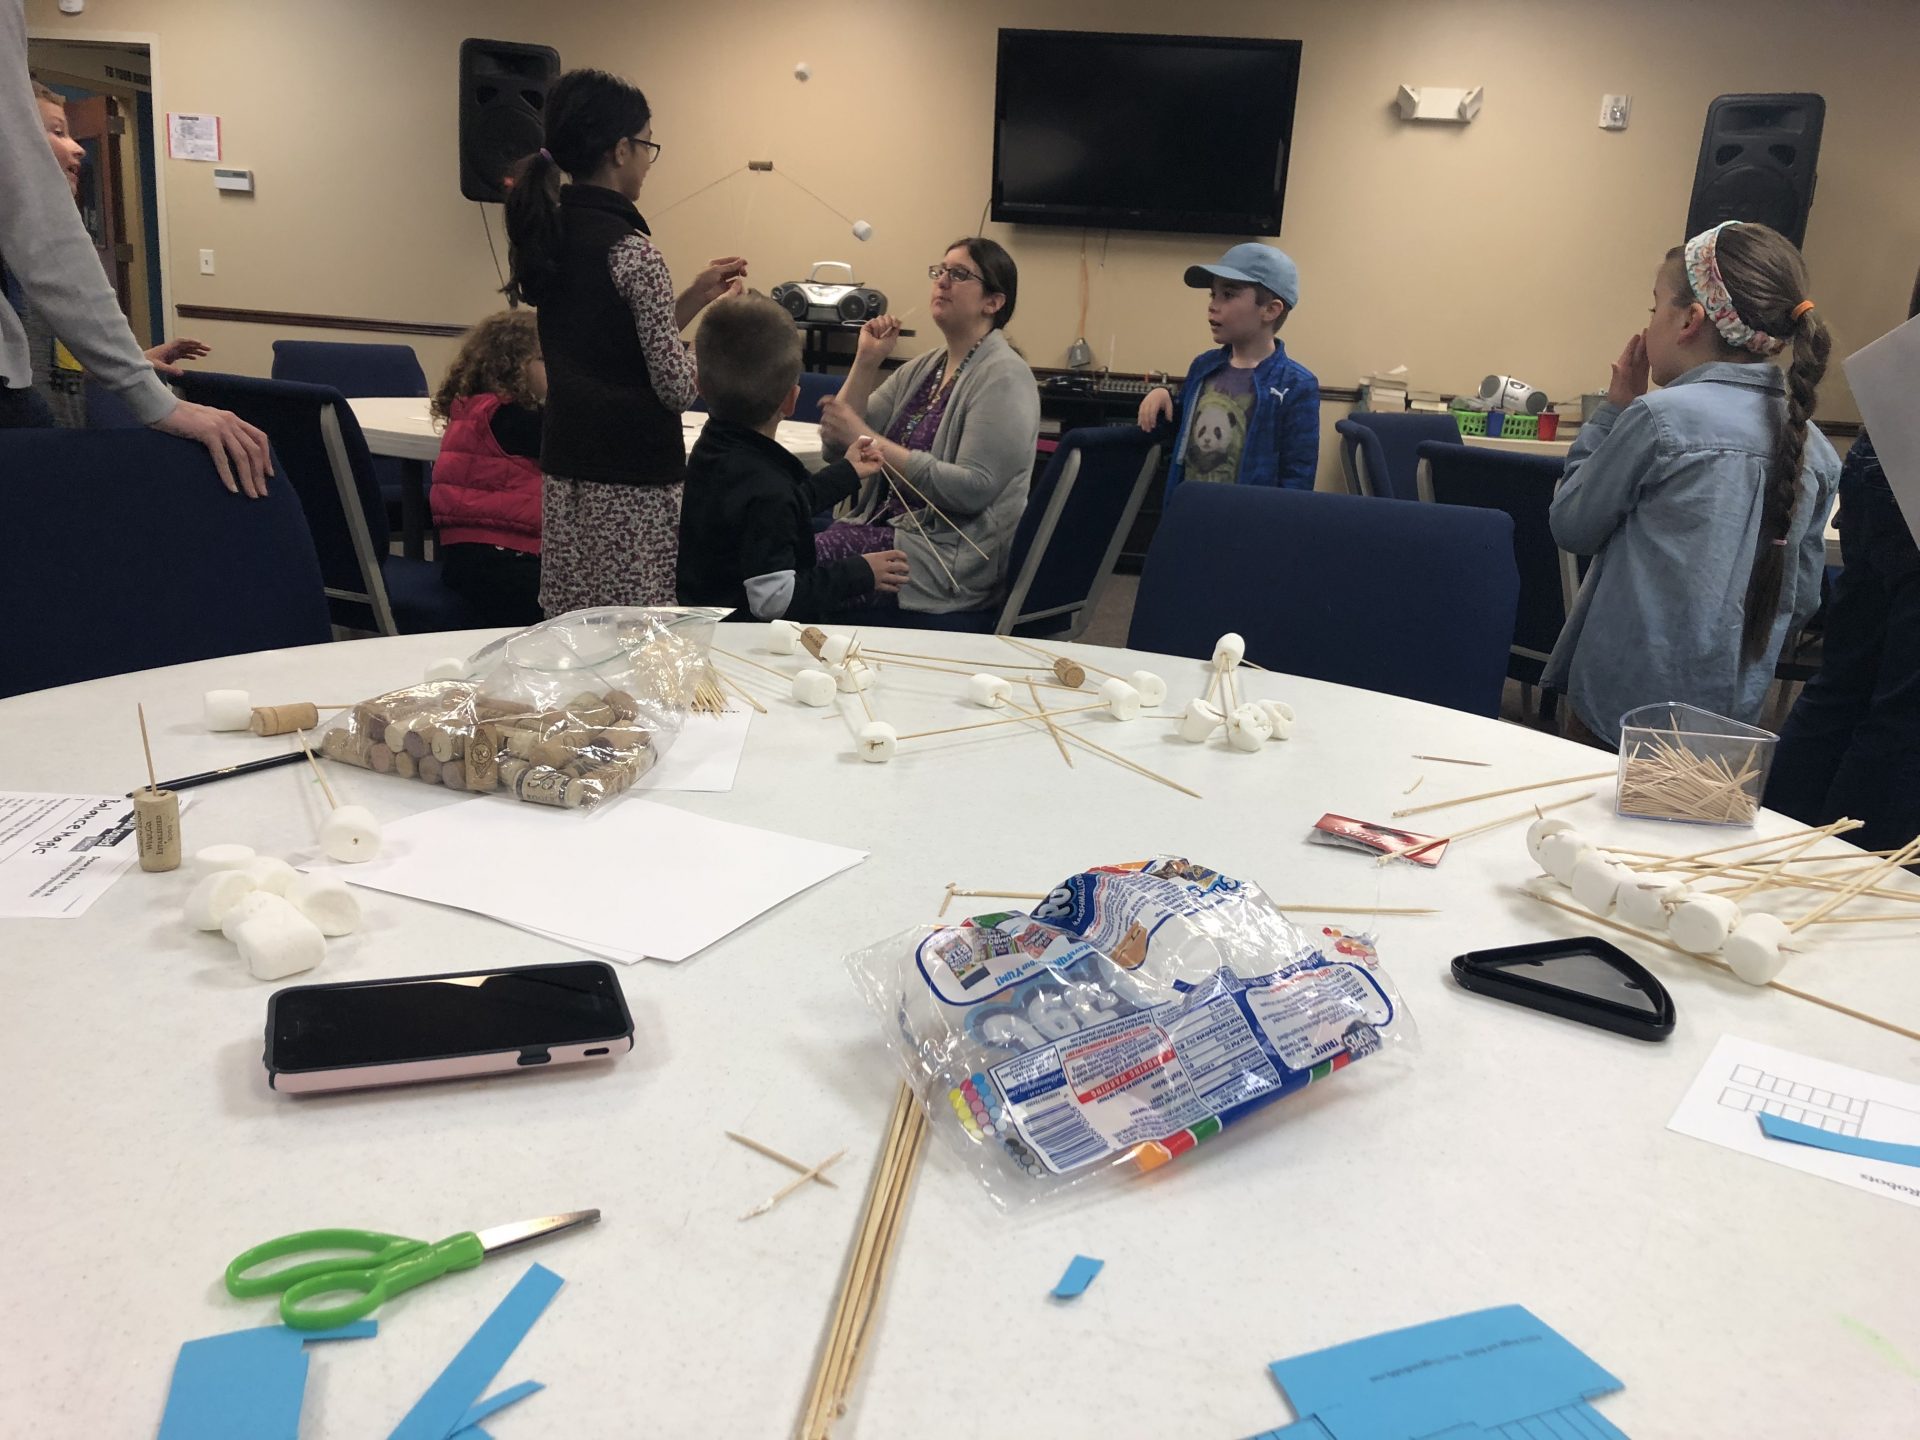 Table with paper, marshmallows, wood skewers and paper laid across. Students, parents and teacher are standing and sitting in the background.